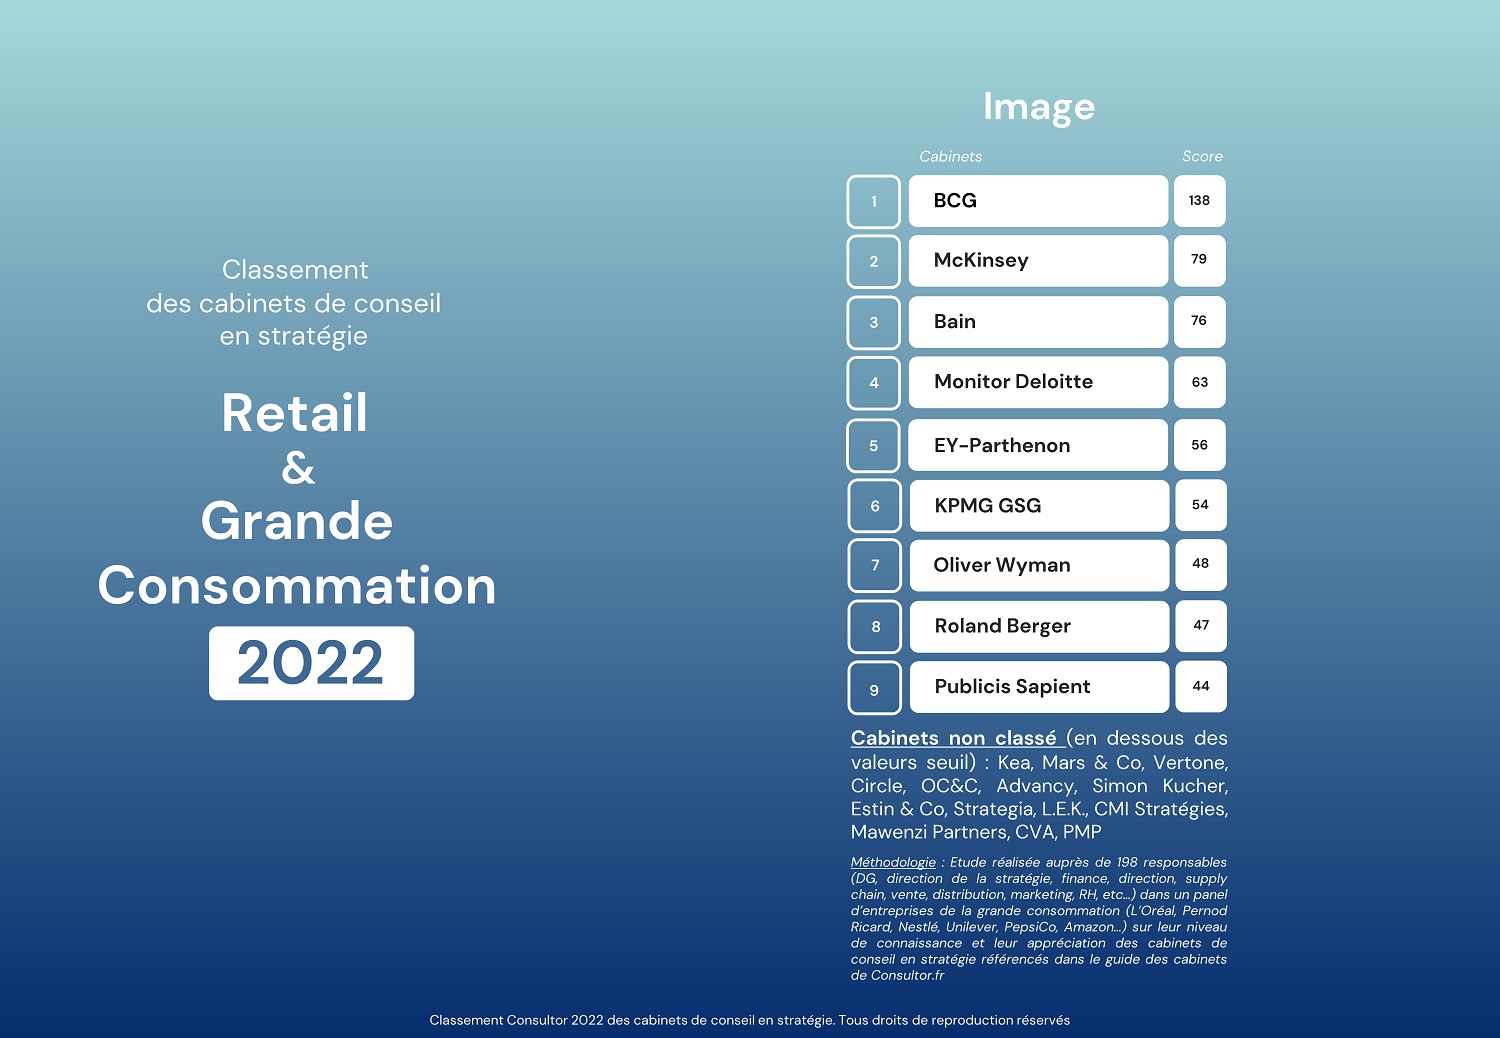 04 07 2022 Classement retail Conso image V2